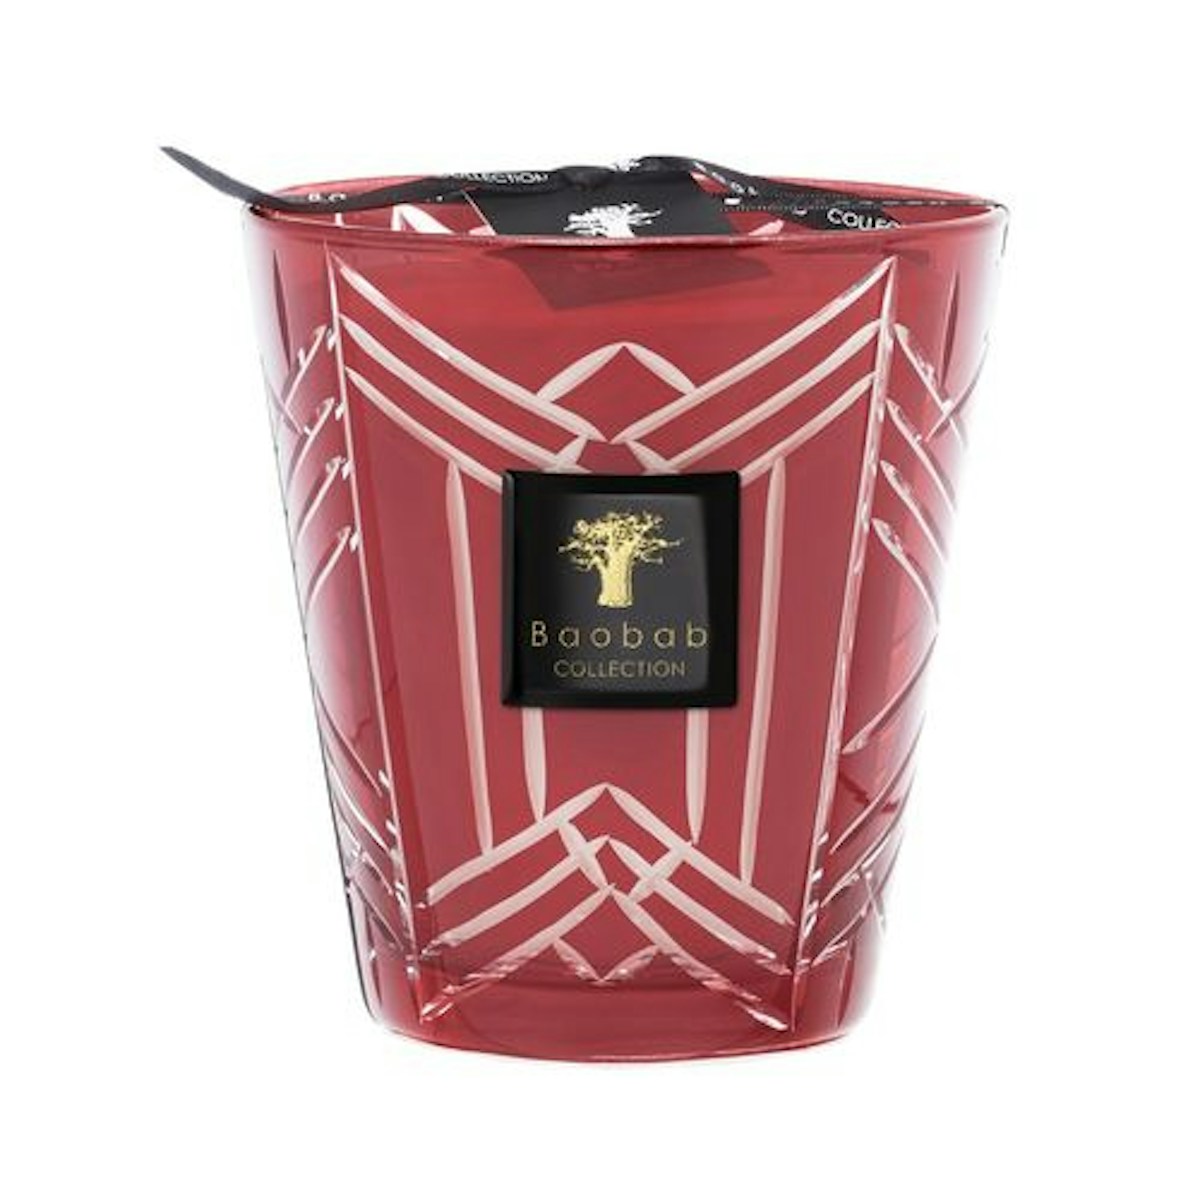 Baobab High Society Candle – Louise - 12 Best Scented Candles & Fragrances For Your Home - Style Guide - LuxDeco.com